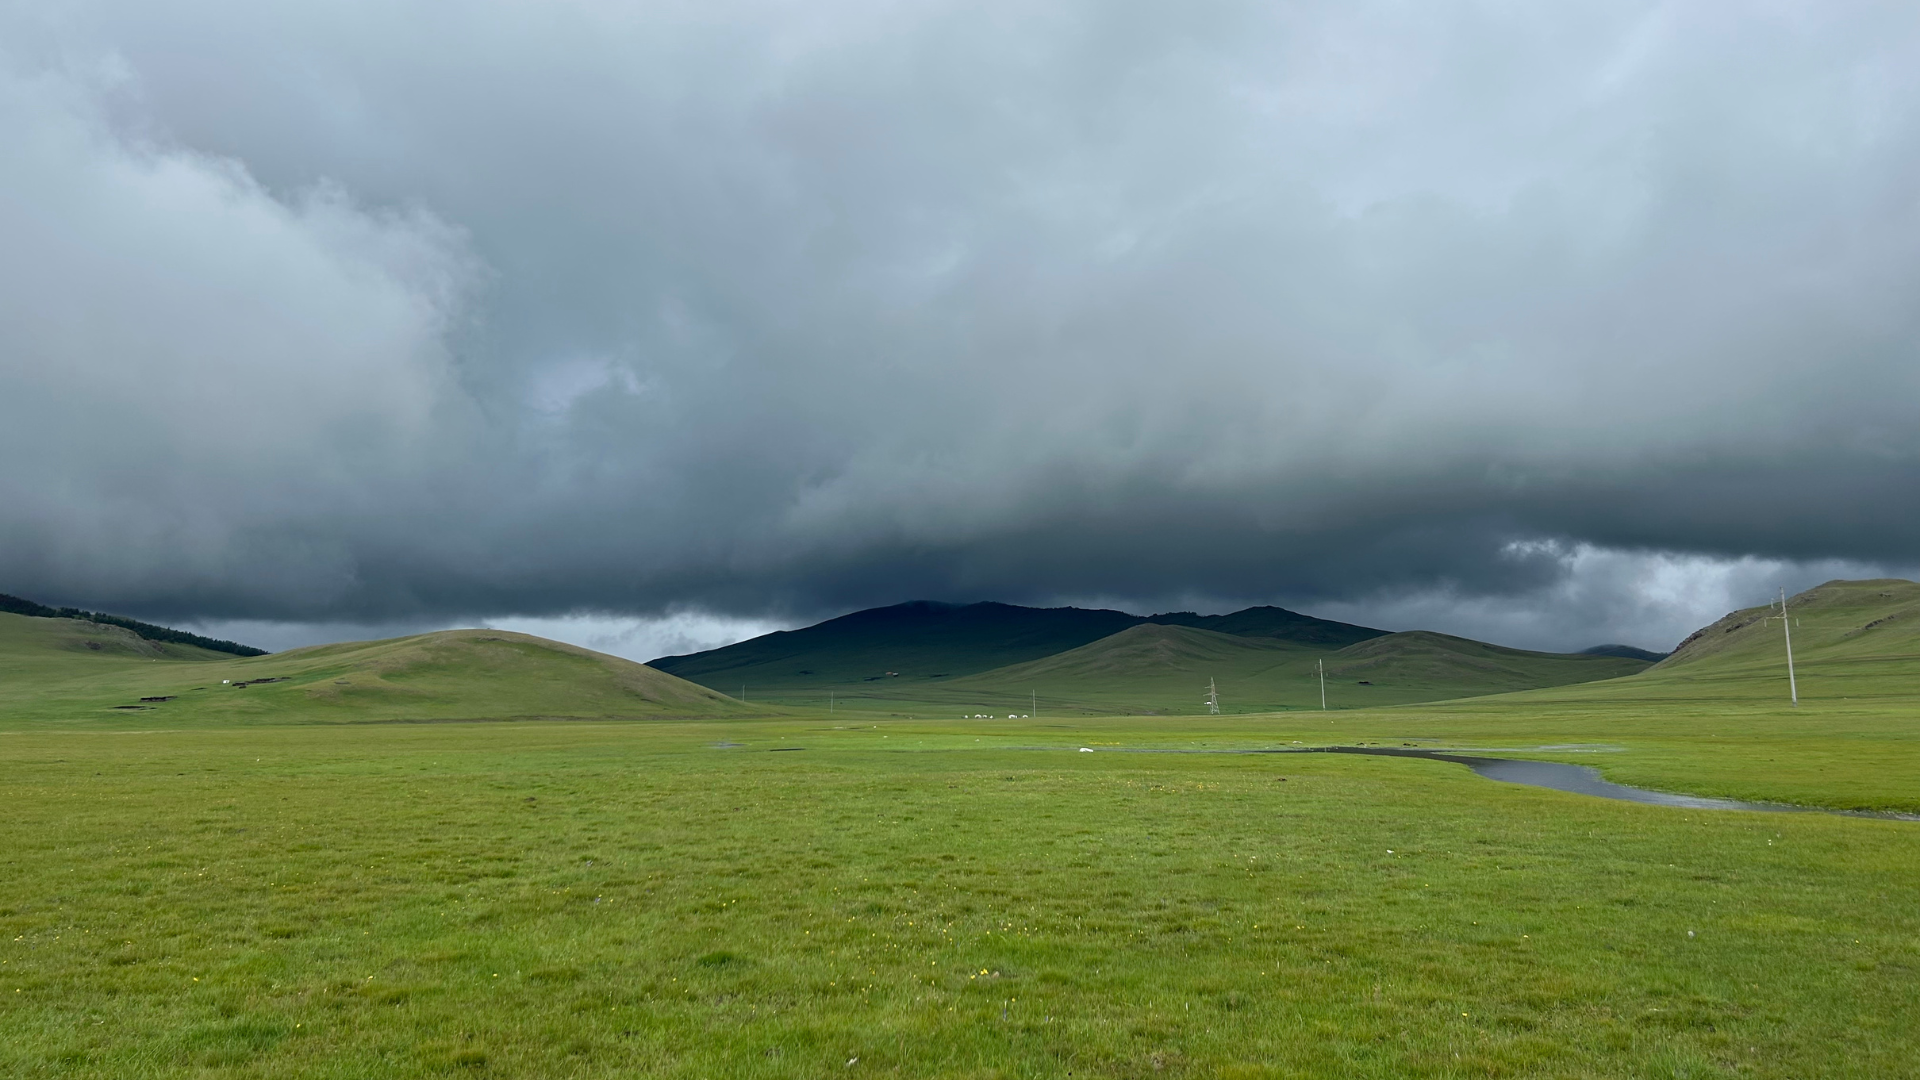 A vast green field stretches out under a dark, cloudy sky. Rolling hills rise in the background, partially shrouded in mist. A small winding stream is visible on the right side, and power lines cut across the landscape.